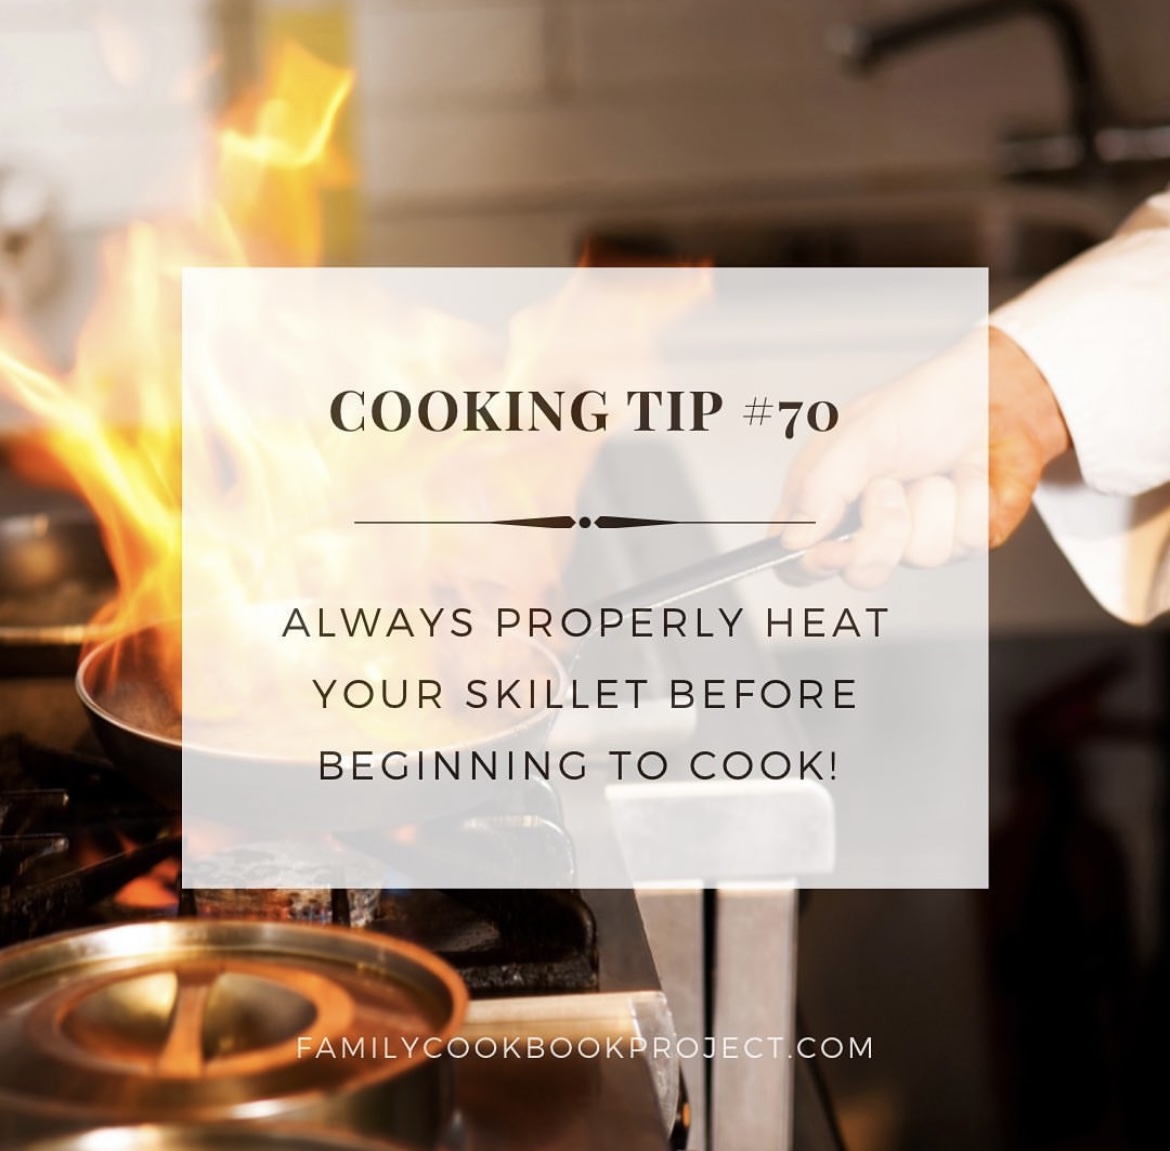 Here's another tip from Family Cookbook Project - Create your own printed cookbook full of your favorite family recipes at familycookbookproject.com/getstarted.asp today!
 
#familycookbookproject #familycookbook #cookbook #cooking #homecooking #food #foodie #recipes #cookingathome #cookingtips